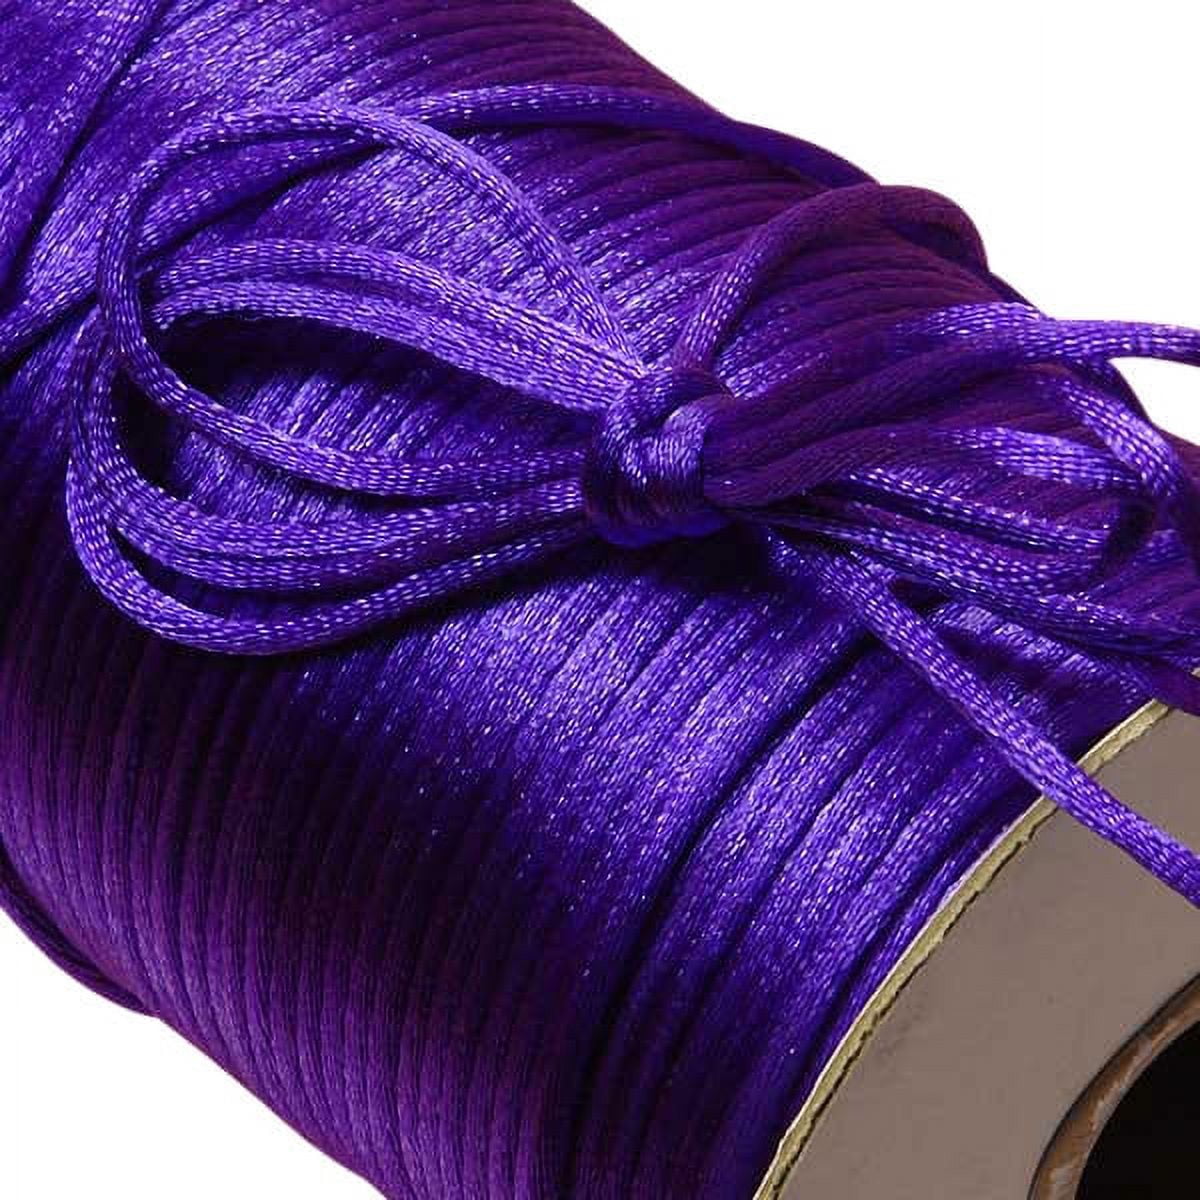 2mm Black Wrapped Silk Satin Cord, Soutache Wrapped Thread Cord, Artificial  Silk Cord, Rope Cord - 2 Yards/1,84m approx.(1 piece)